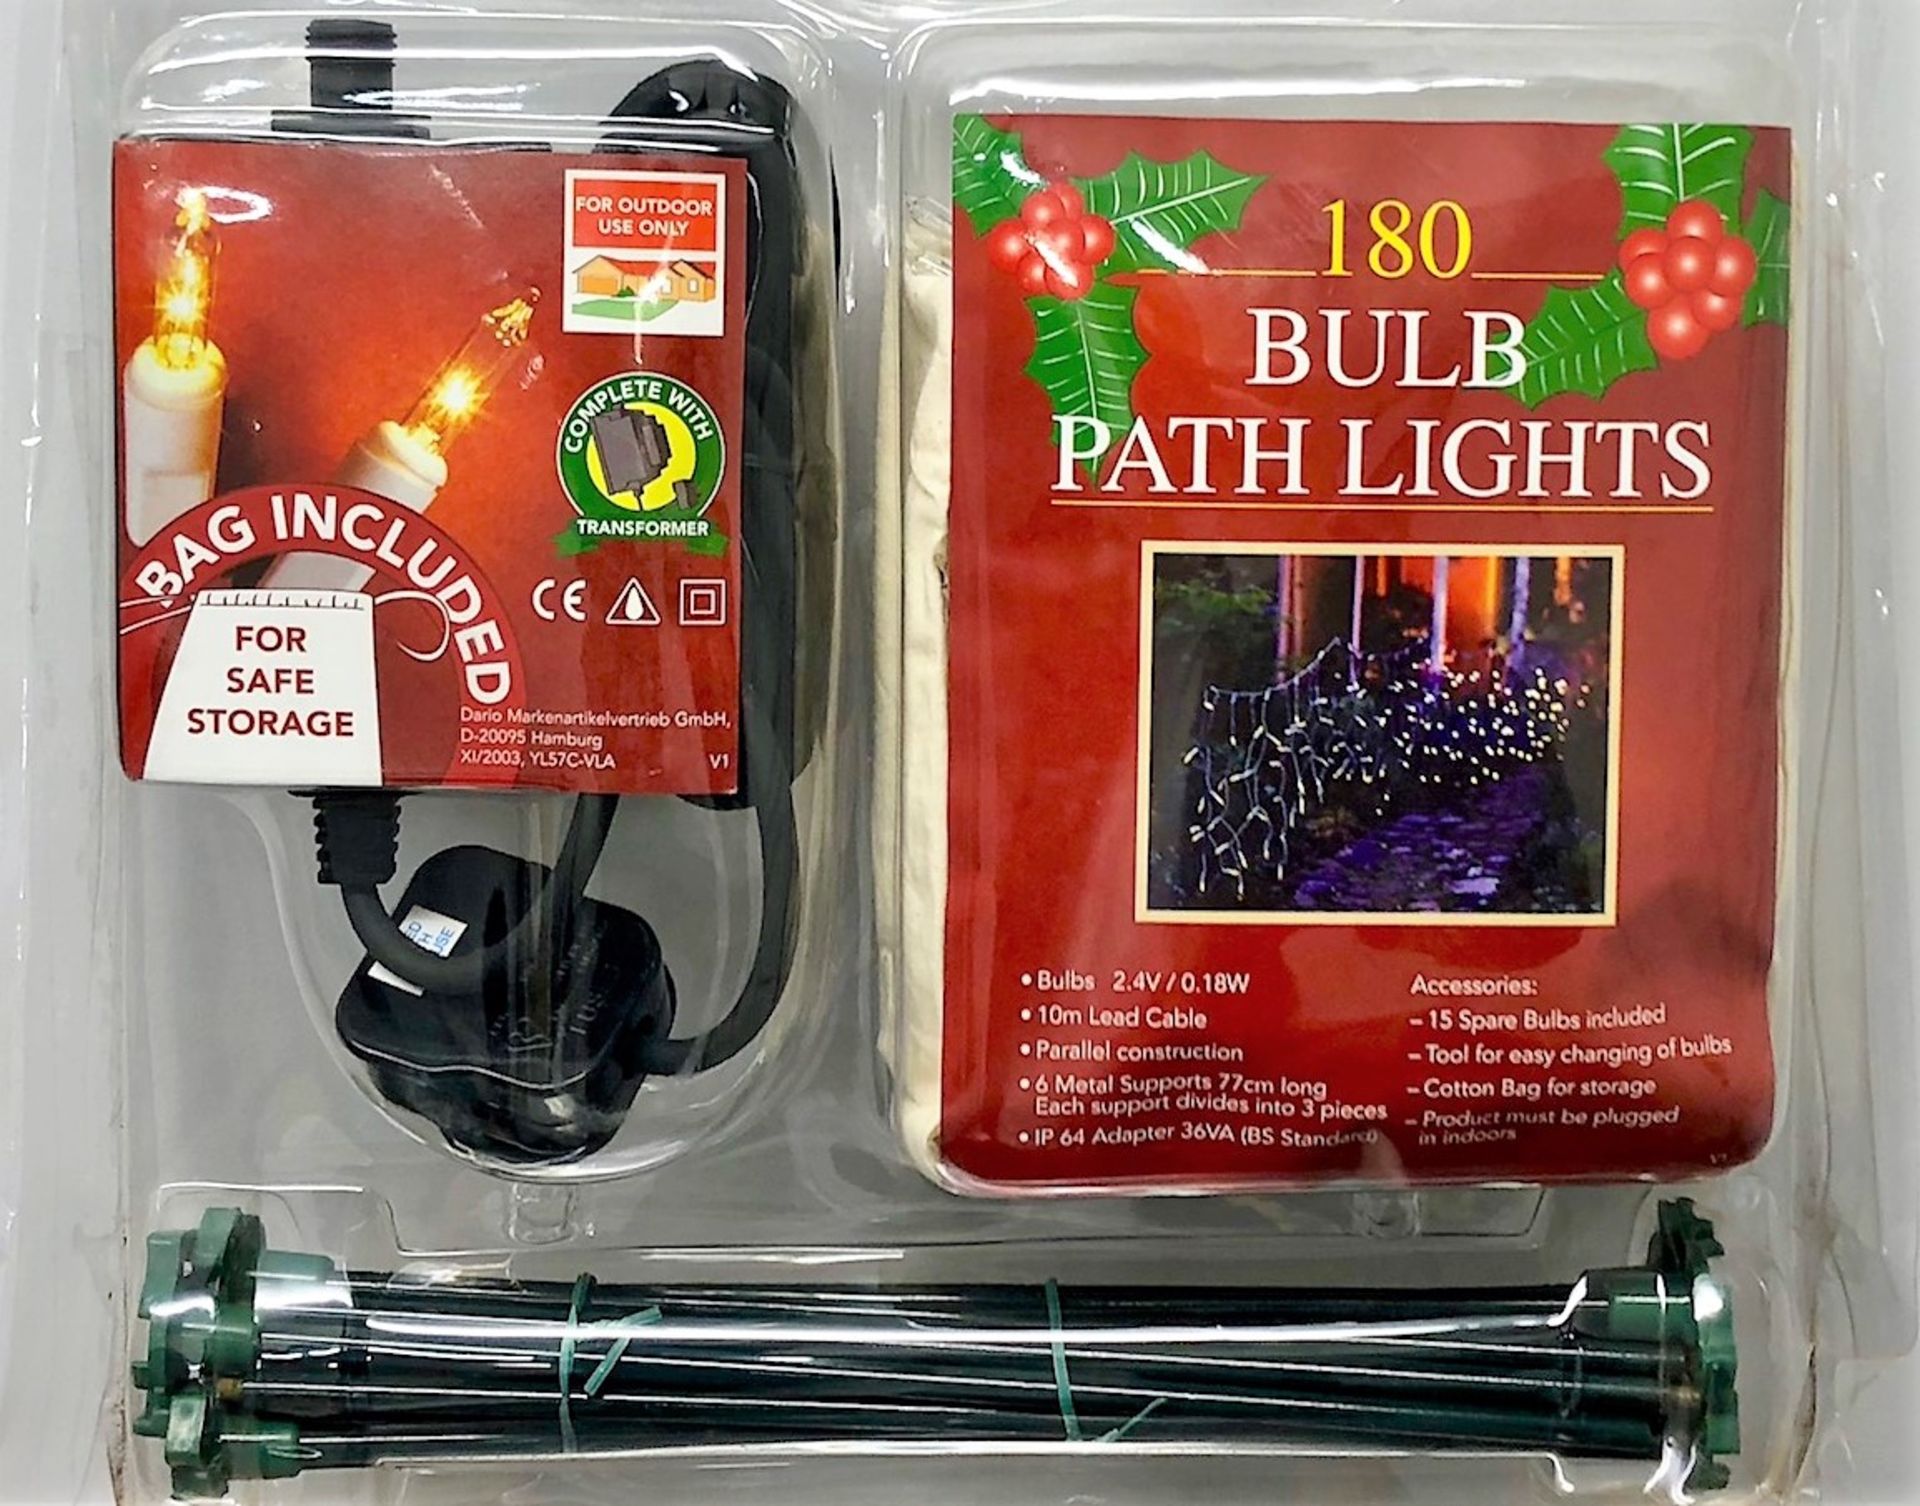 + VAT Brand New 180 Bulb Path Lights - 2.4V / 0.18W Bulbs - 10m Lead Cable - 6 Metal Supports 77cm